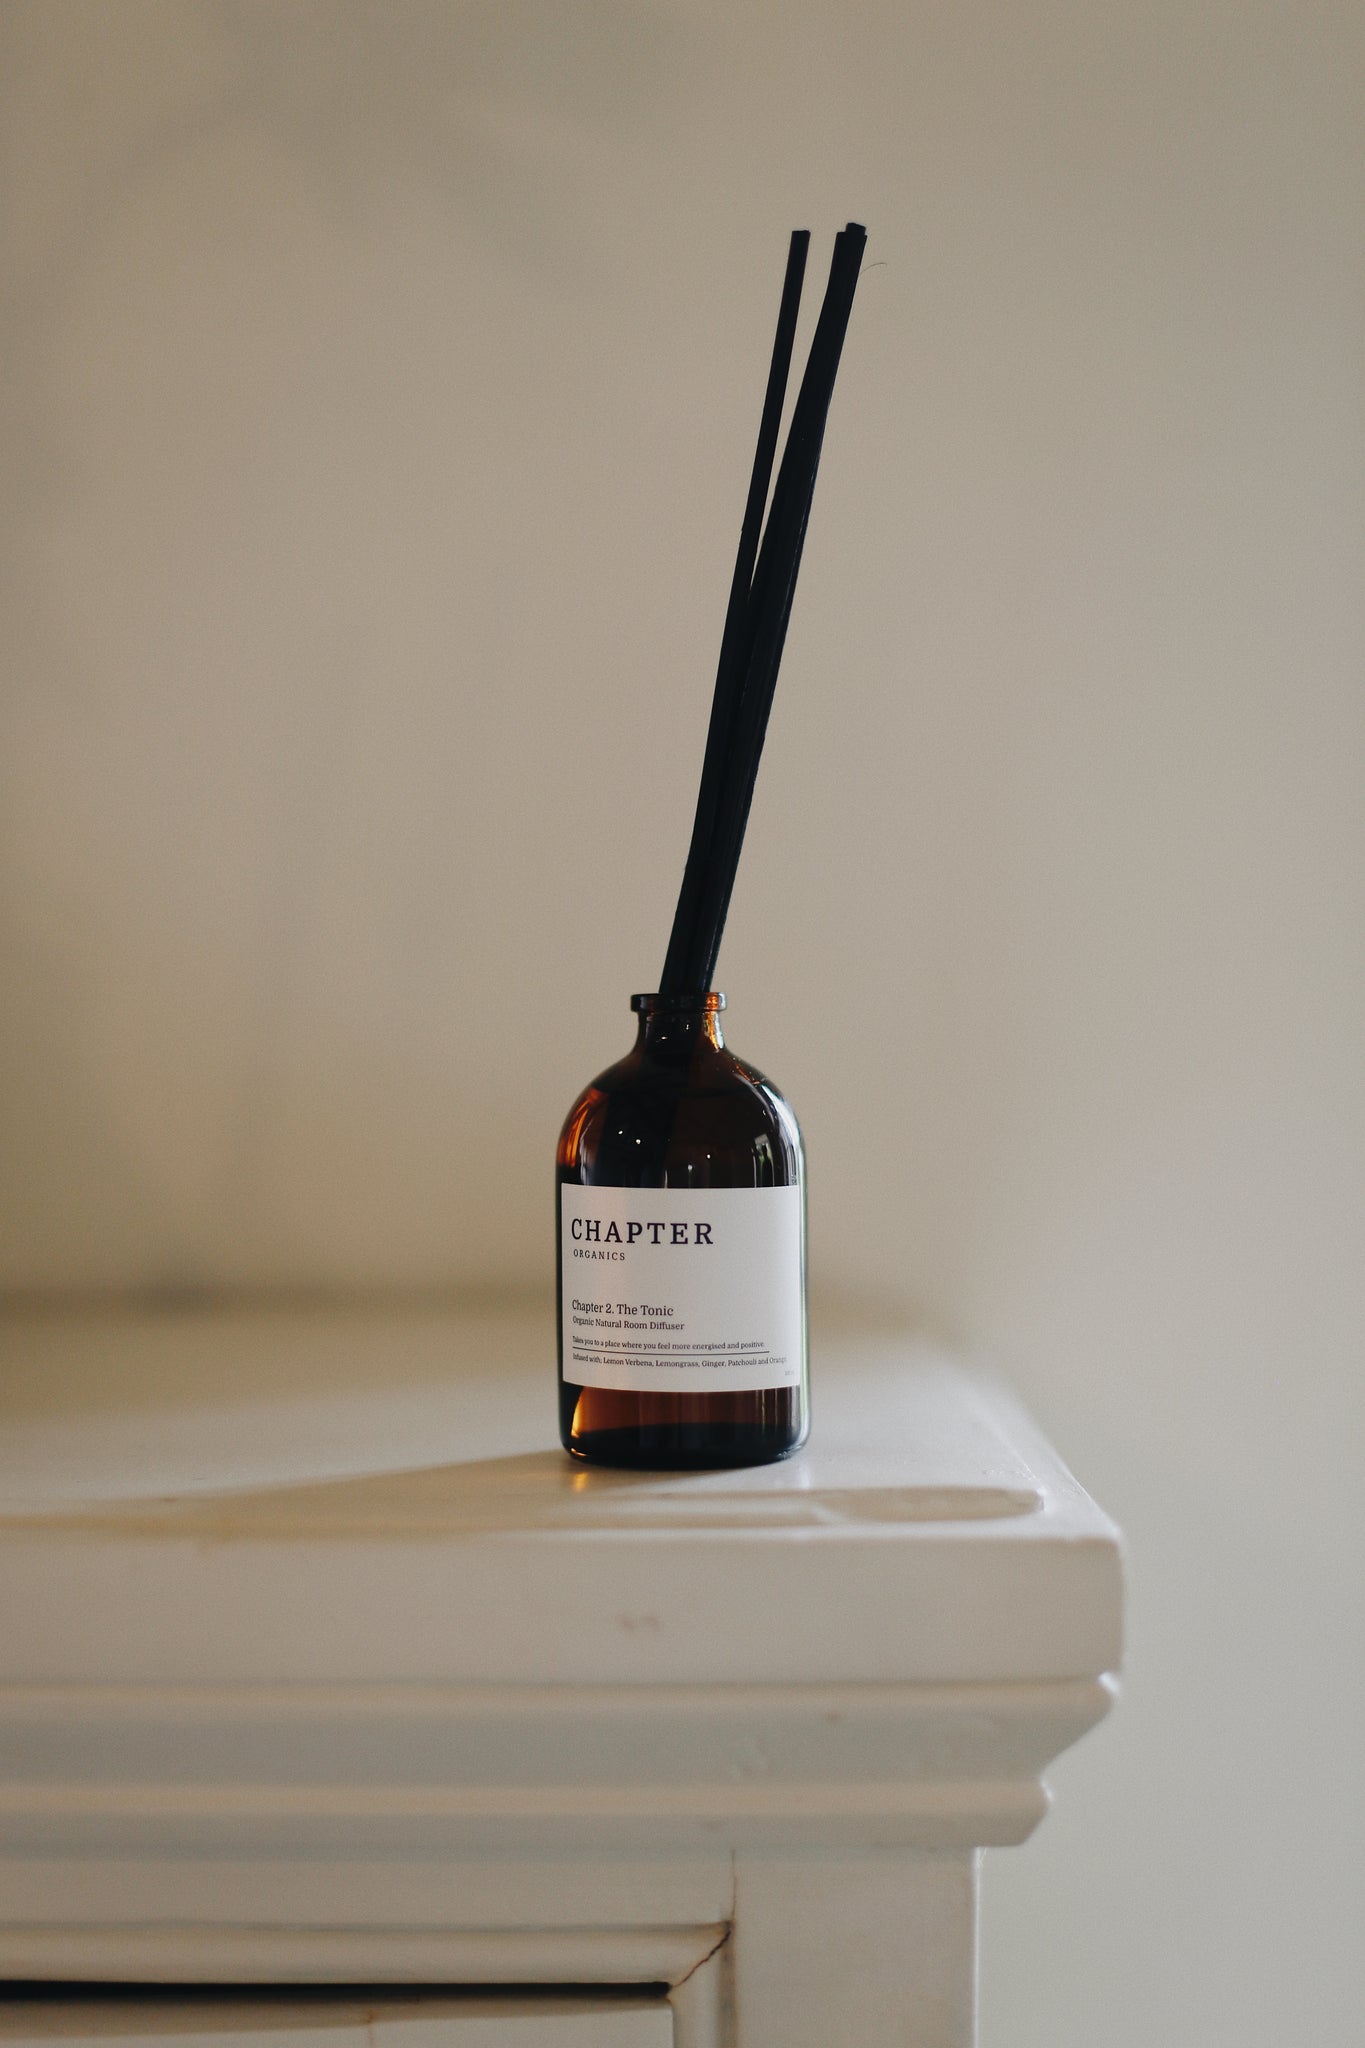 The Tonic Room Diffuser